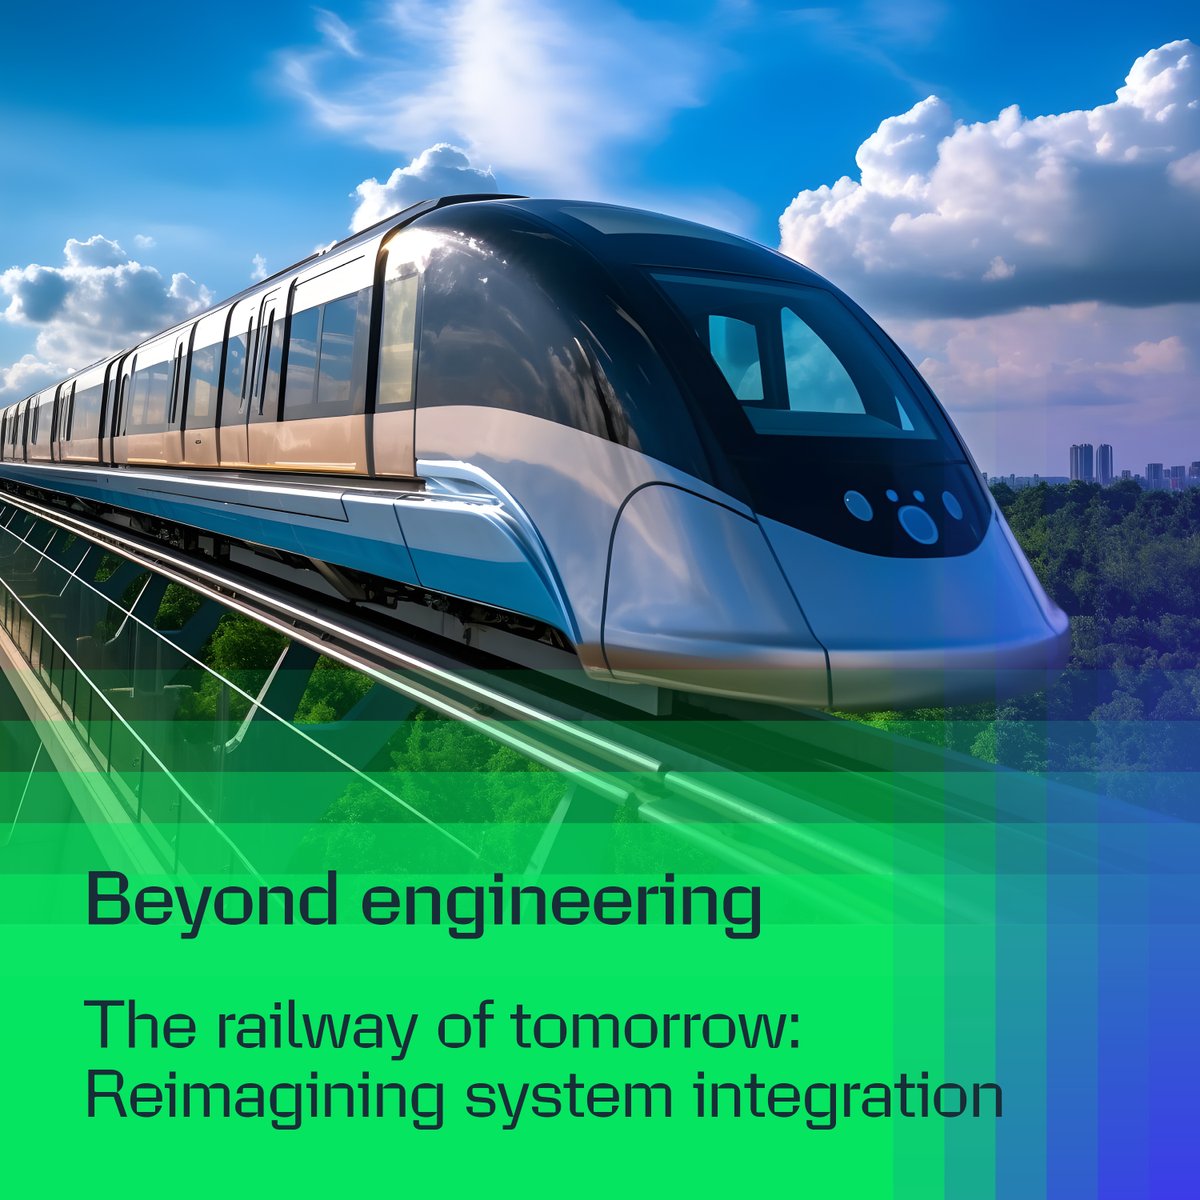 Building the railway of tomorrow means delivering new, complex technology on time and on budget. Learn how reimagining system integration can help. atkinsrealis.com/en/engineering… #BeyondEngineering #EngineeringABetterFuture #PeopleDataTechnology